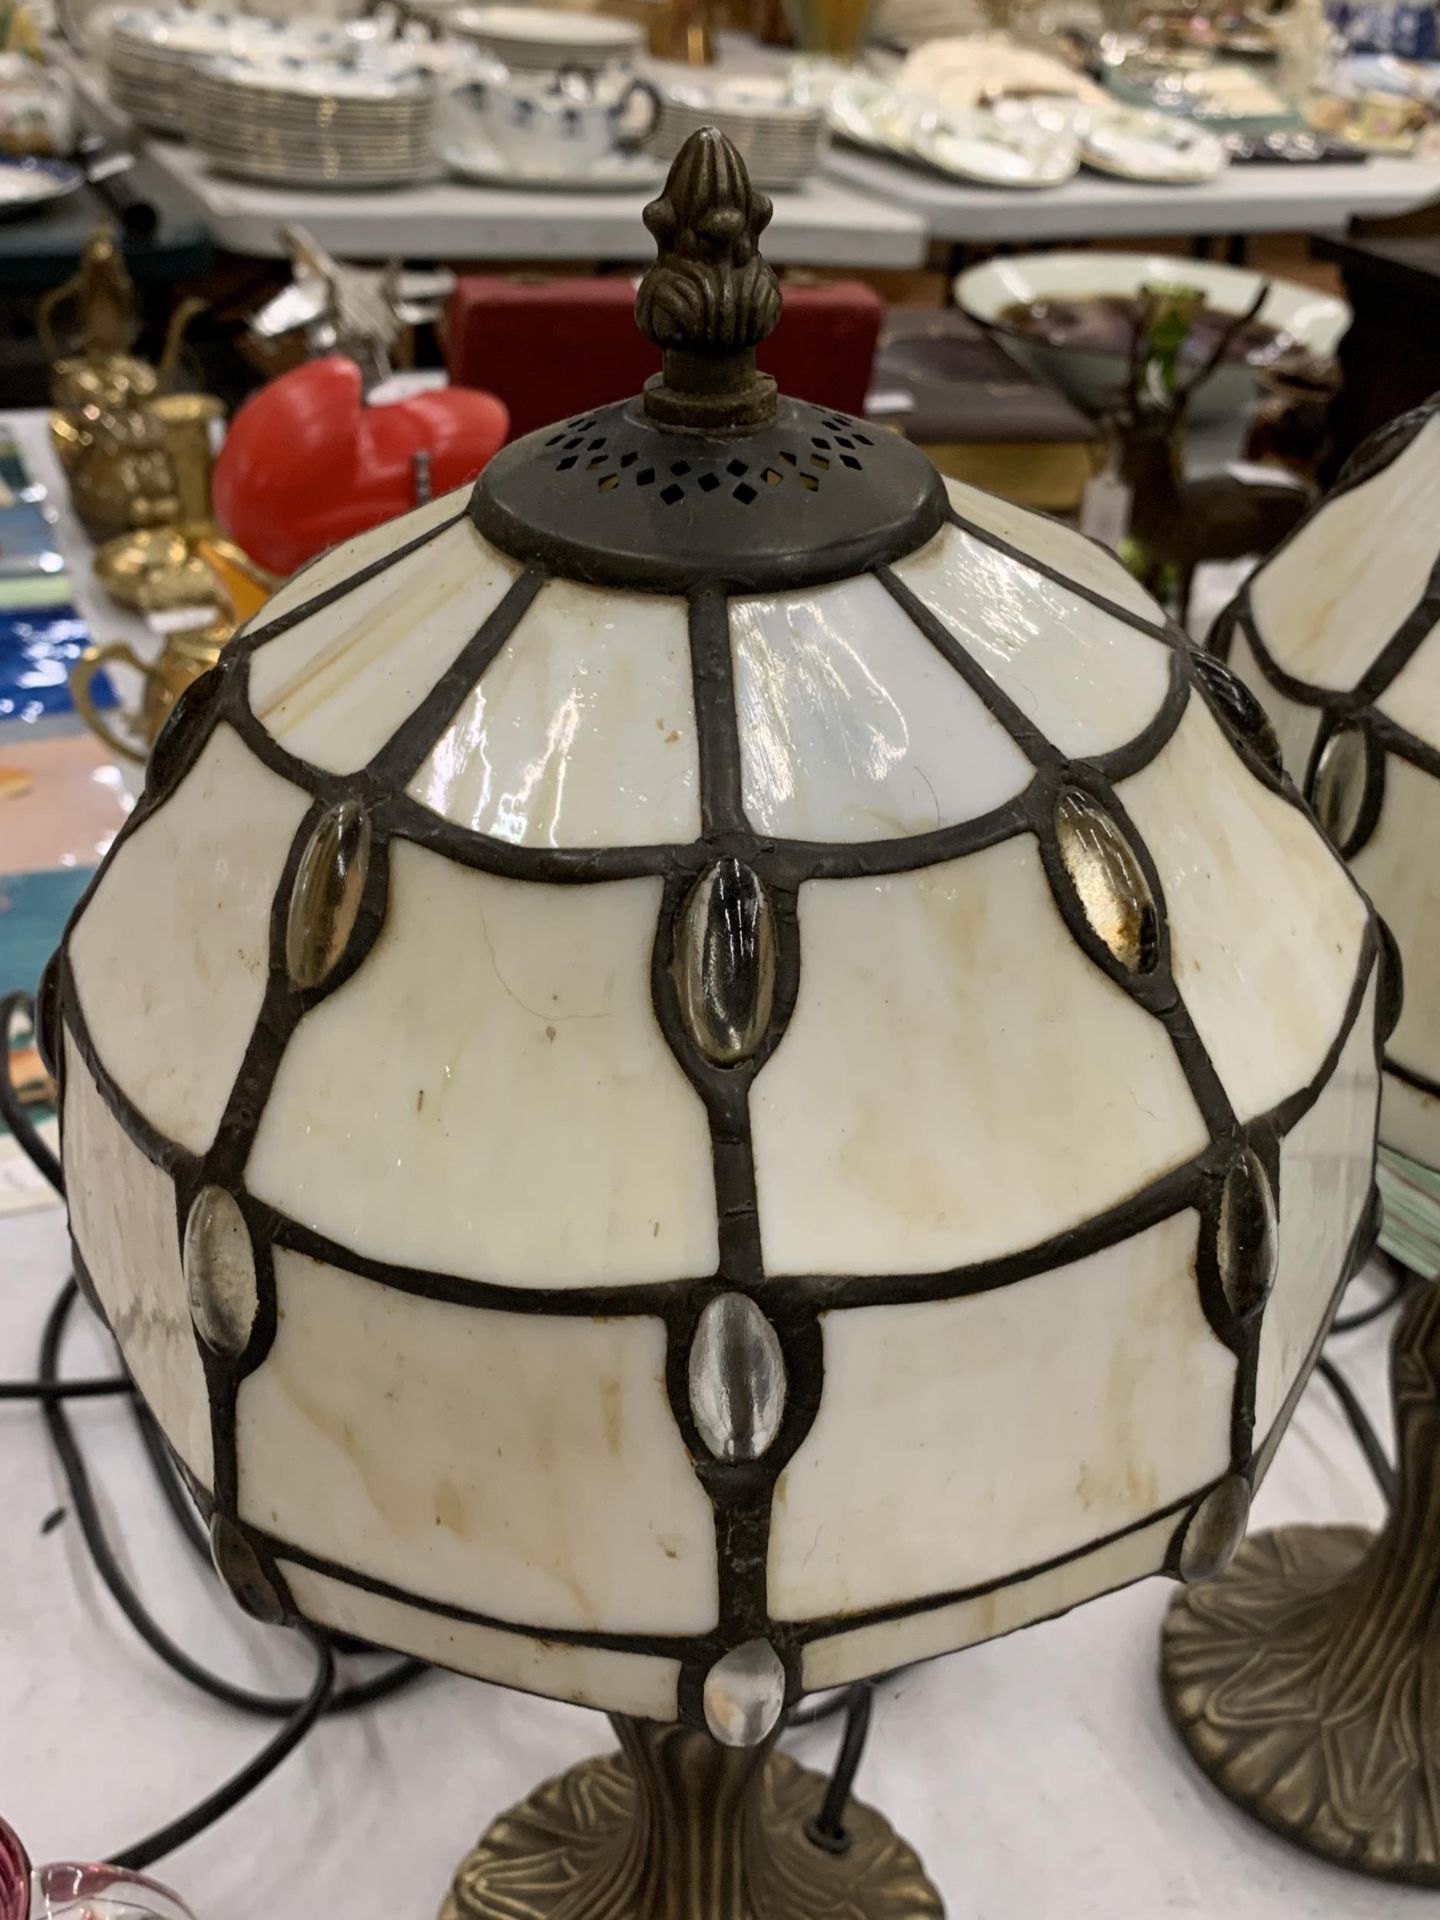 A PAIR OF TIFFANY STYLE CYLINDRICAL GLASS TABLE LAMPS WITH WHITE AND AMBER SHADES - Image 3 of 4